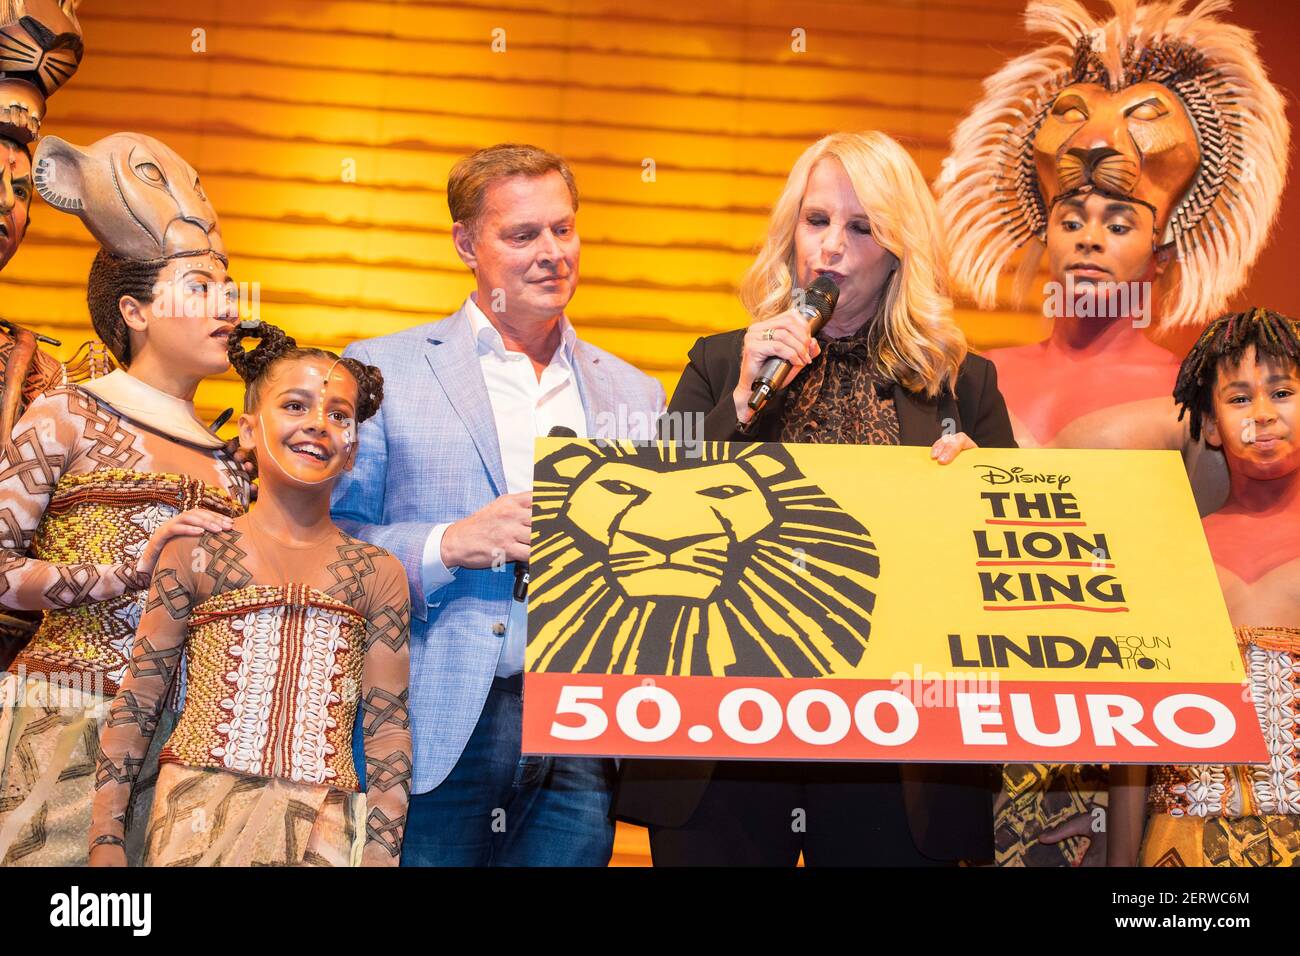 Albert Verlinde and Linda de Mol during the second anniversary of The Lion  King at the AFAS Circus Theater in Scheveningen, the LINDA.foundation by  Linda de Mol will receive a €50,000 checue. (